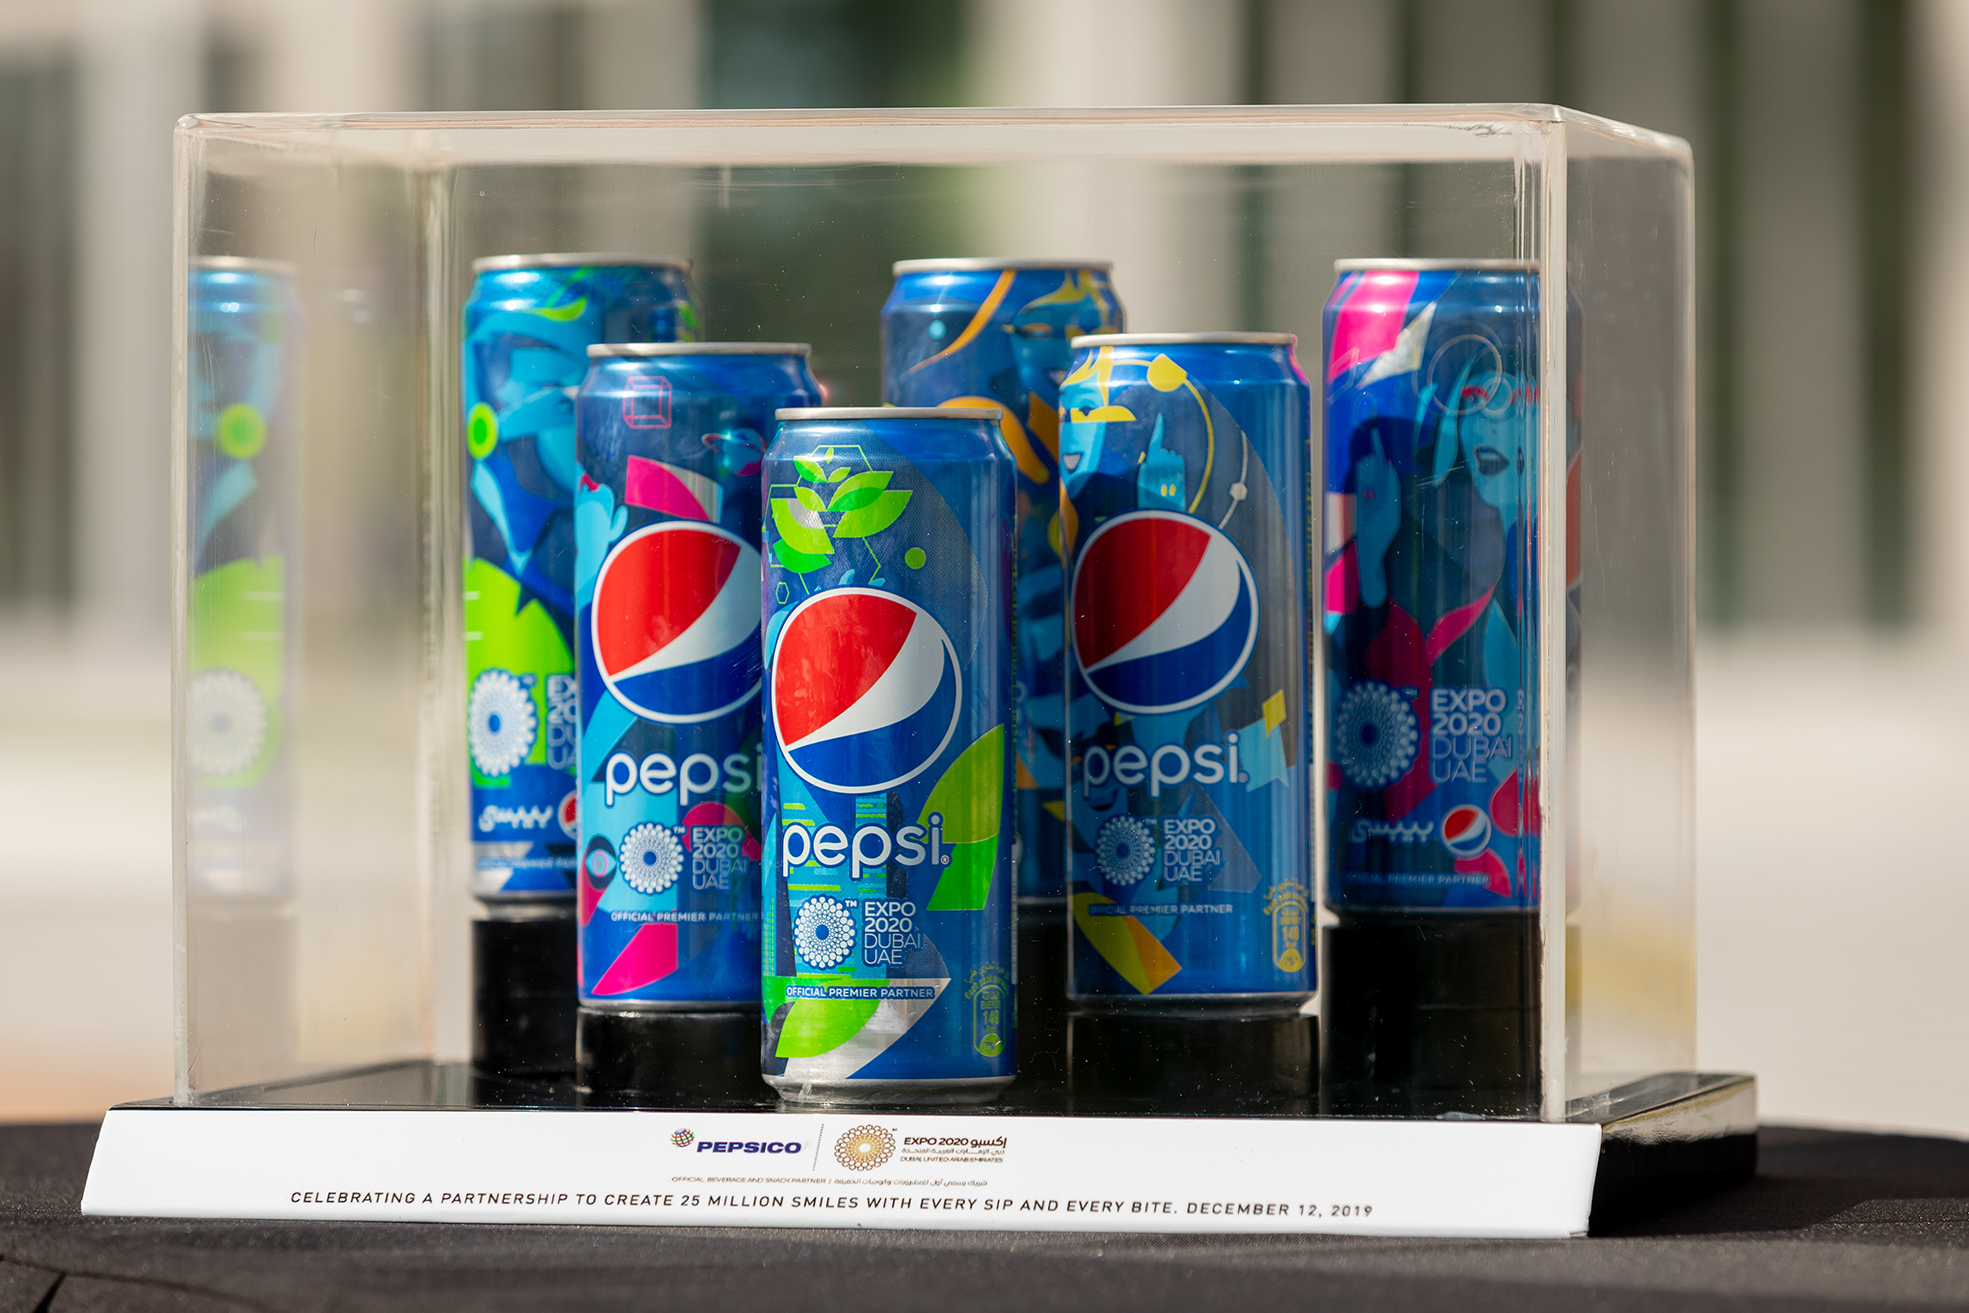 PepsiCo named the official soft drink partner for the United